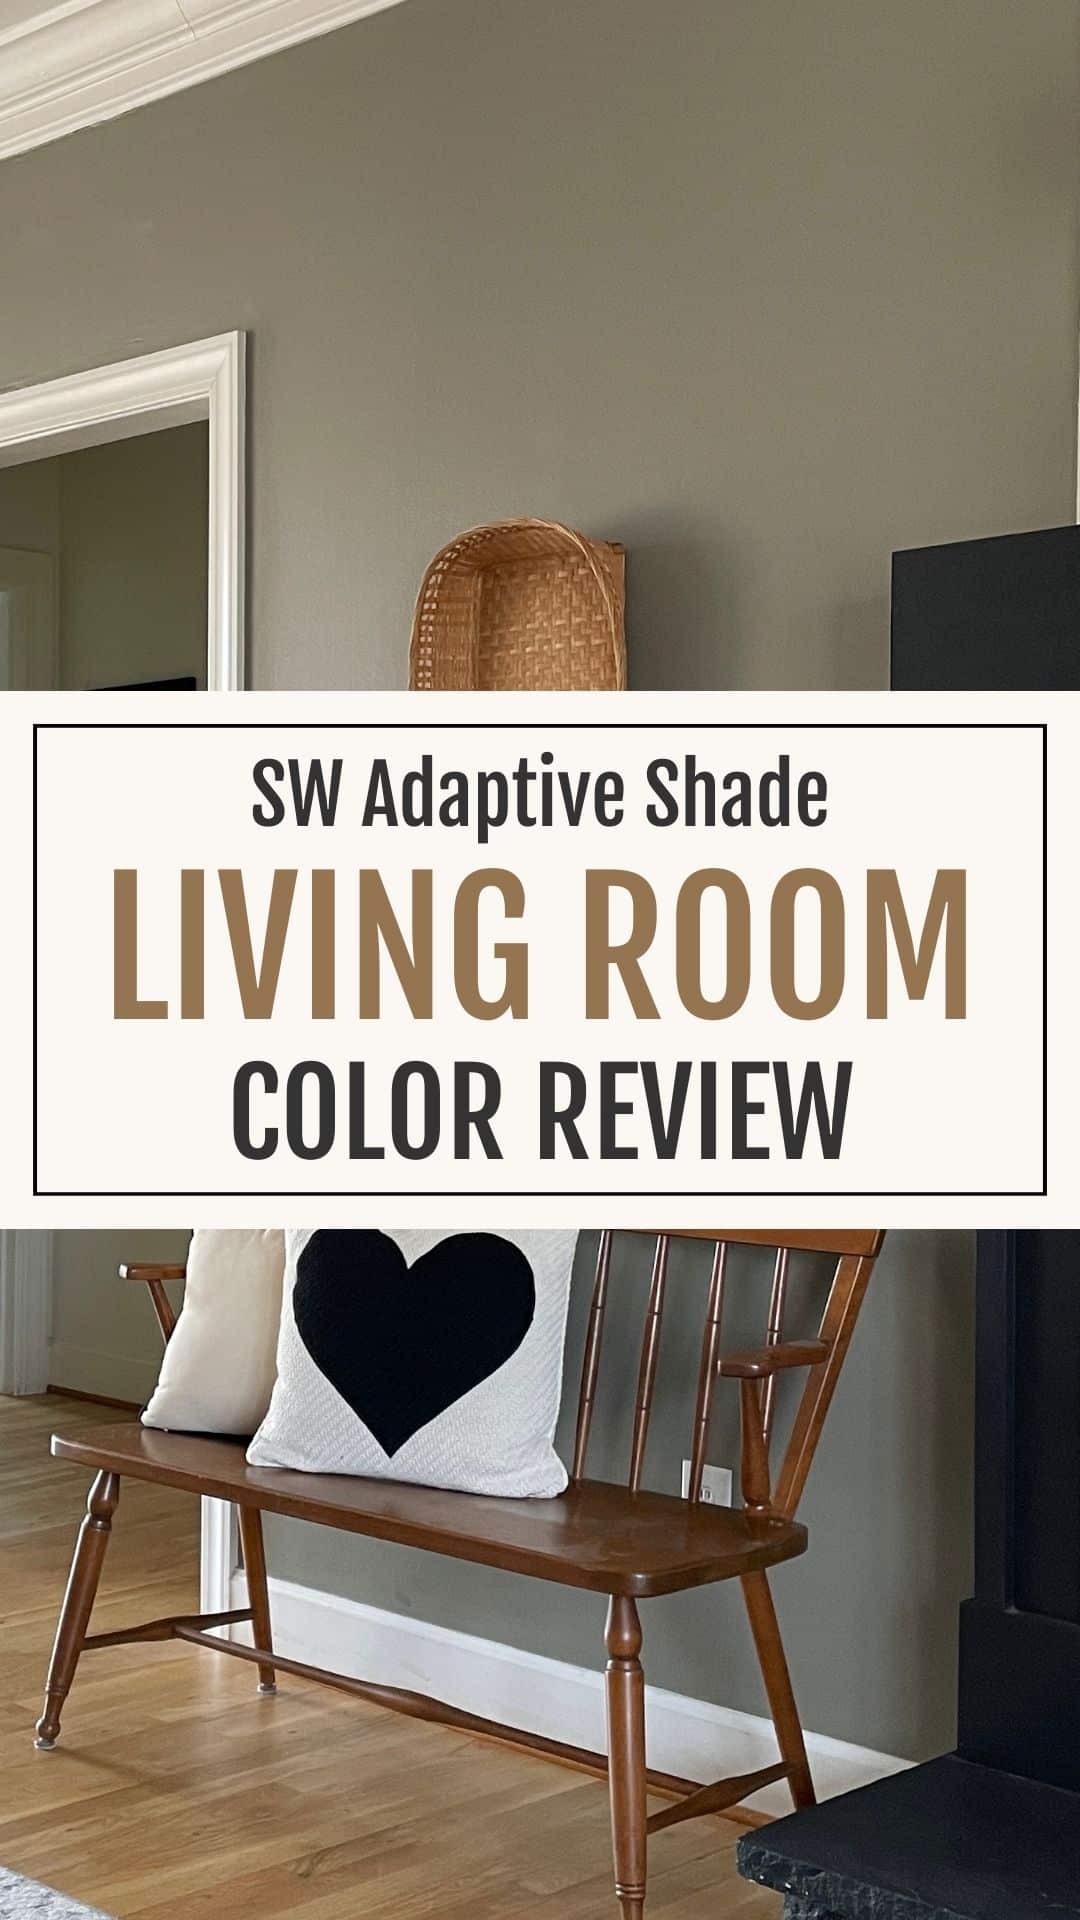 living room walls painted in Adaptive shade paint color